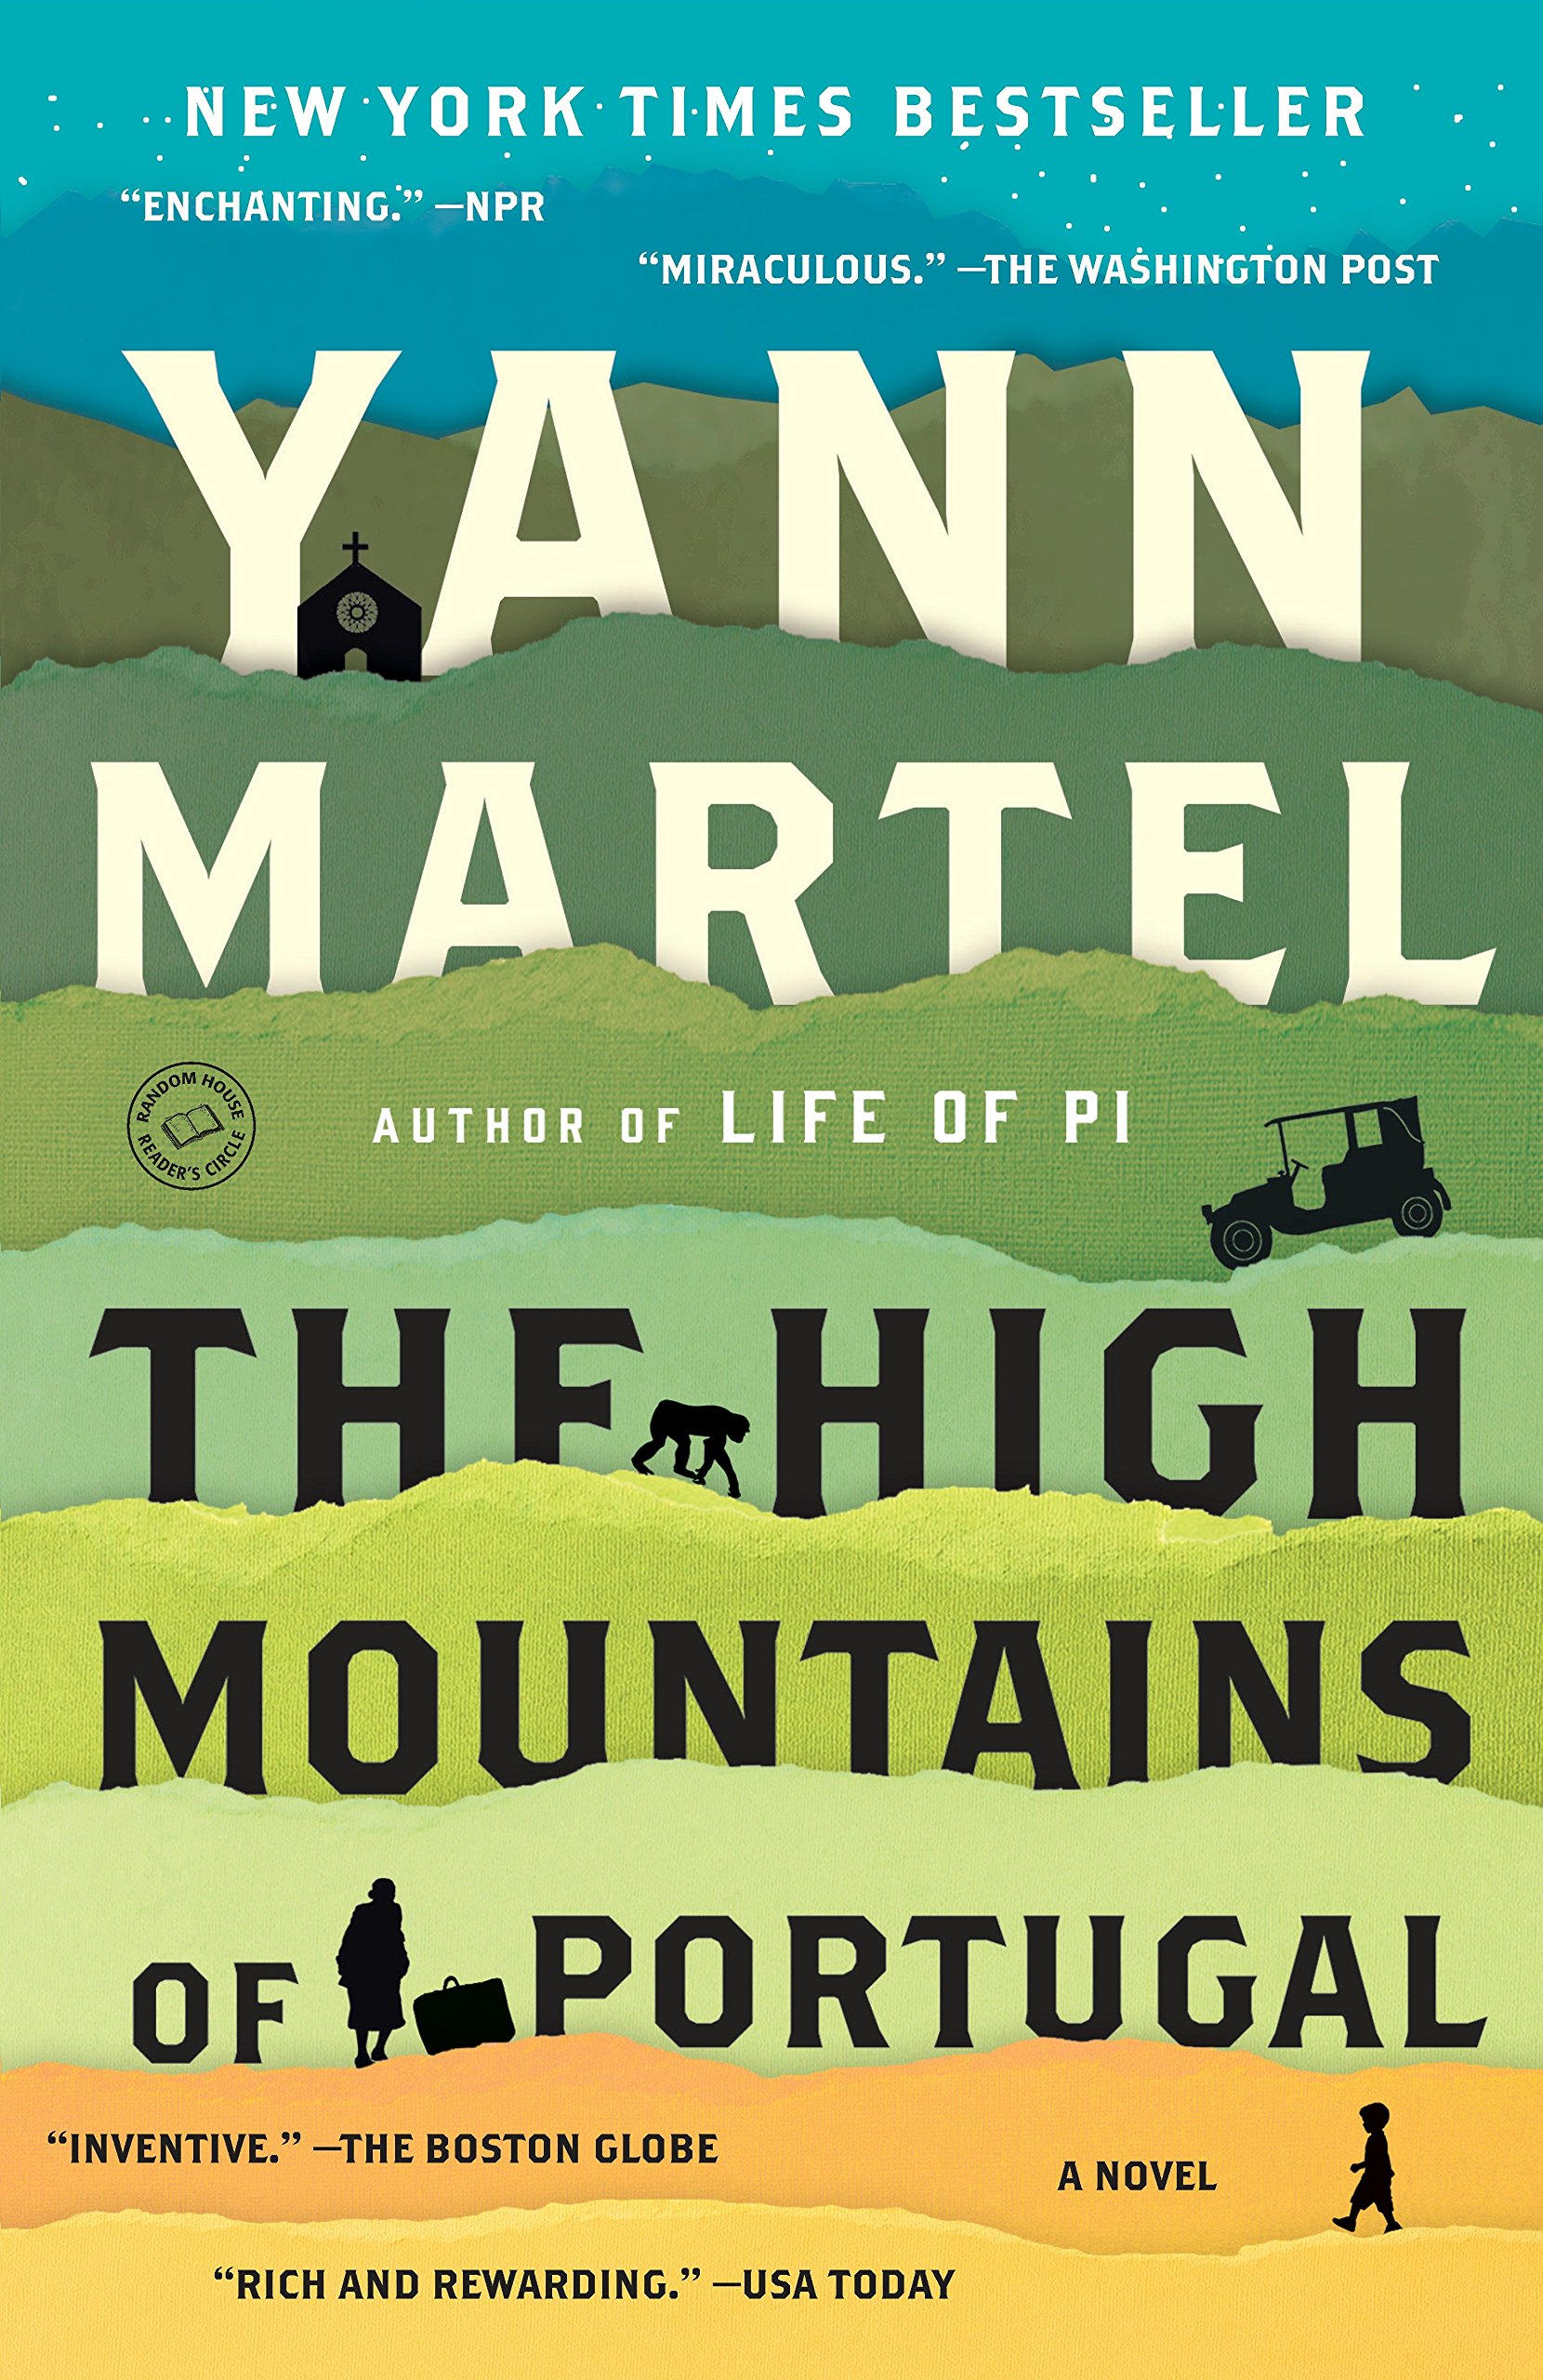 Cover of The High Mountains of Portugal by Yann Martel